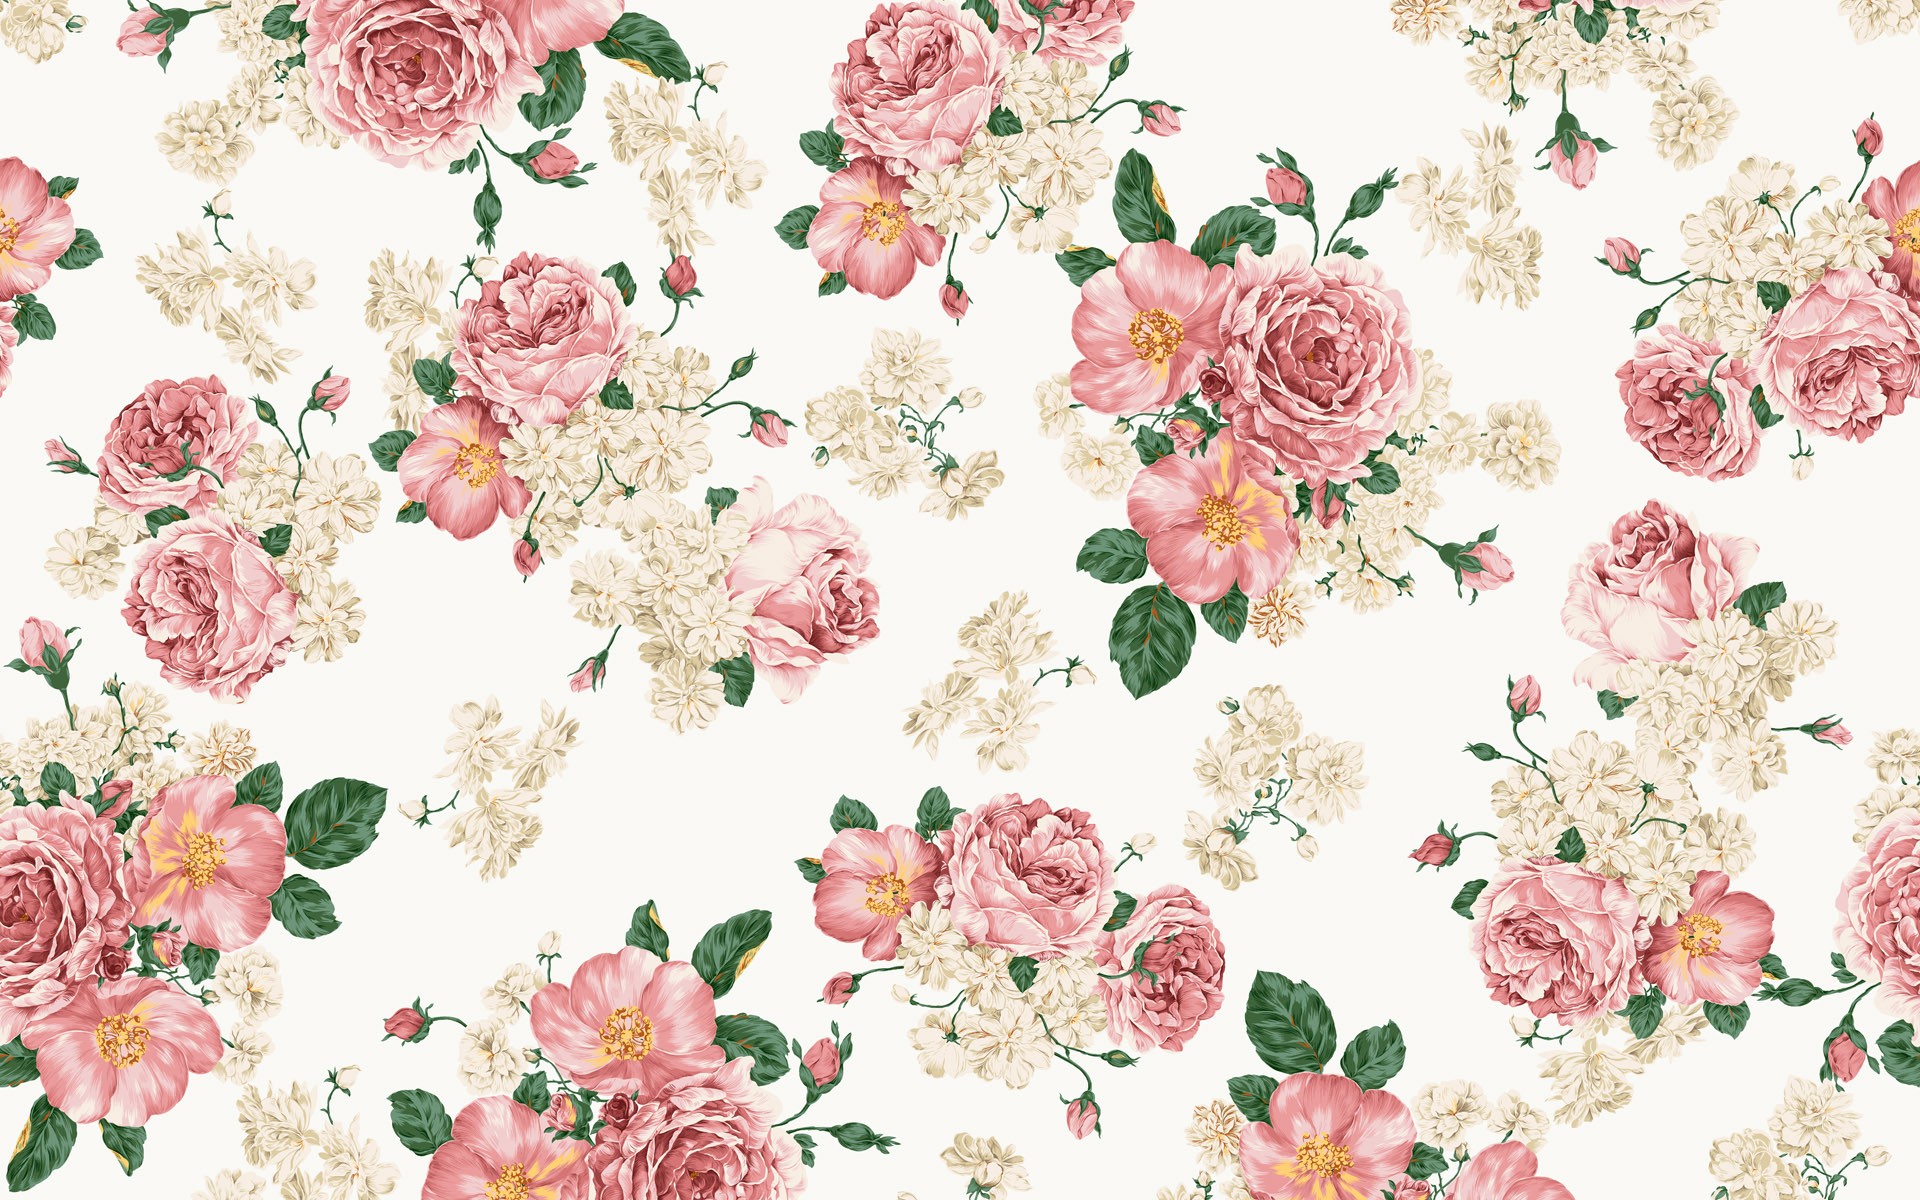 Floral background tumblr hd wallpaper